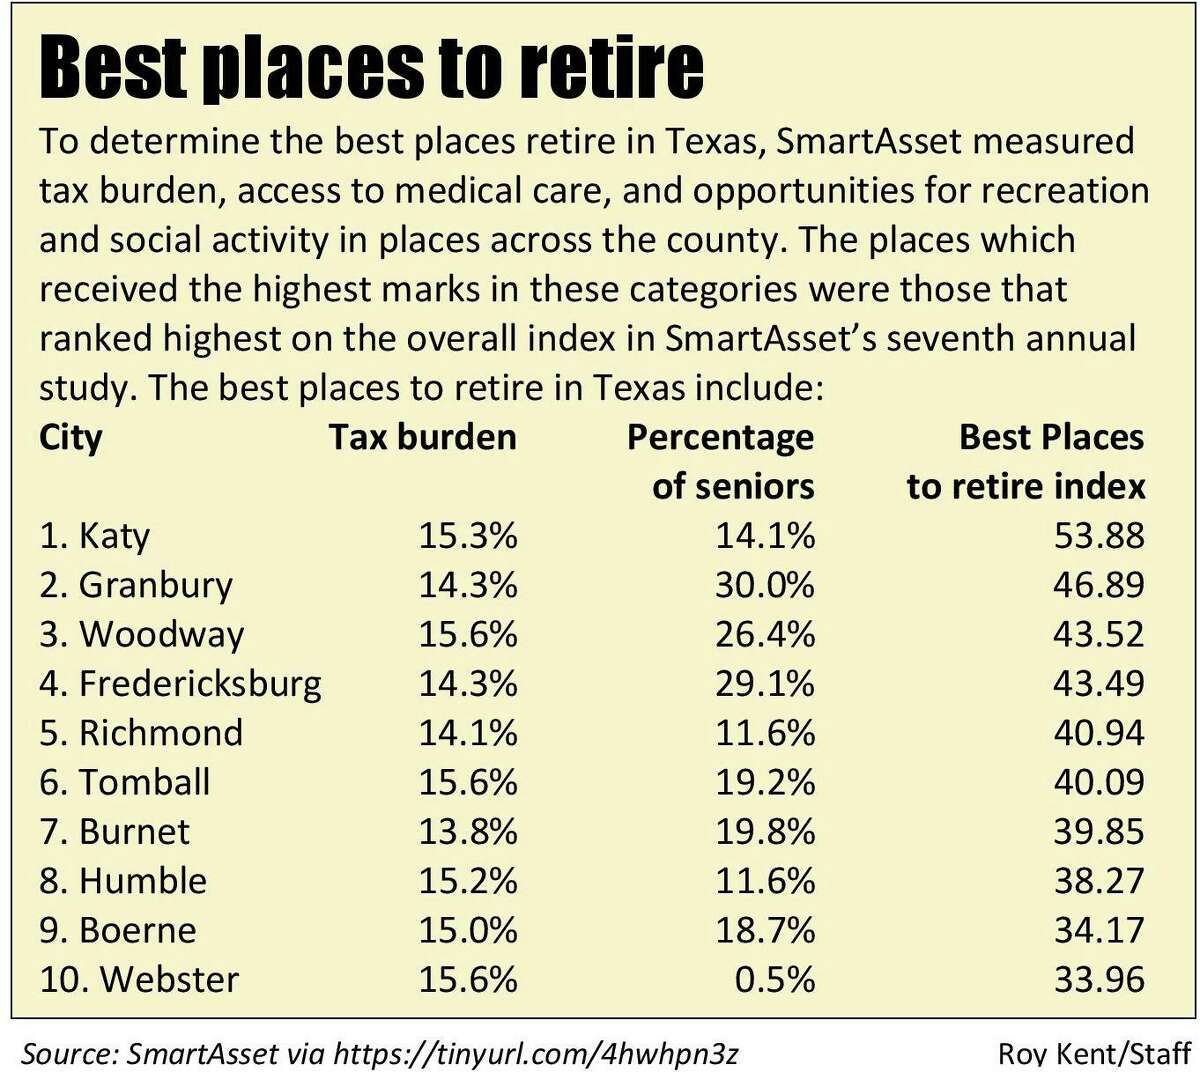 Katy designated the top place to retire in Texas in 2022 survey conducted by SmartAsset.